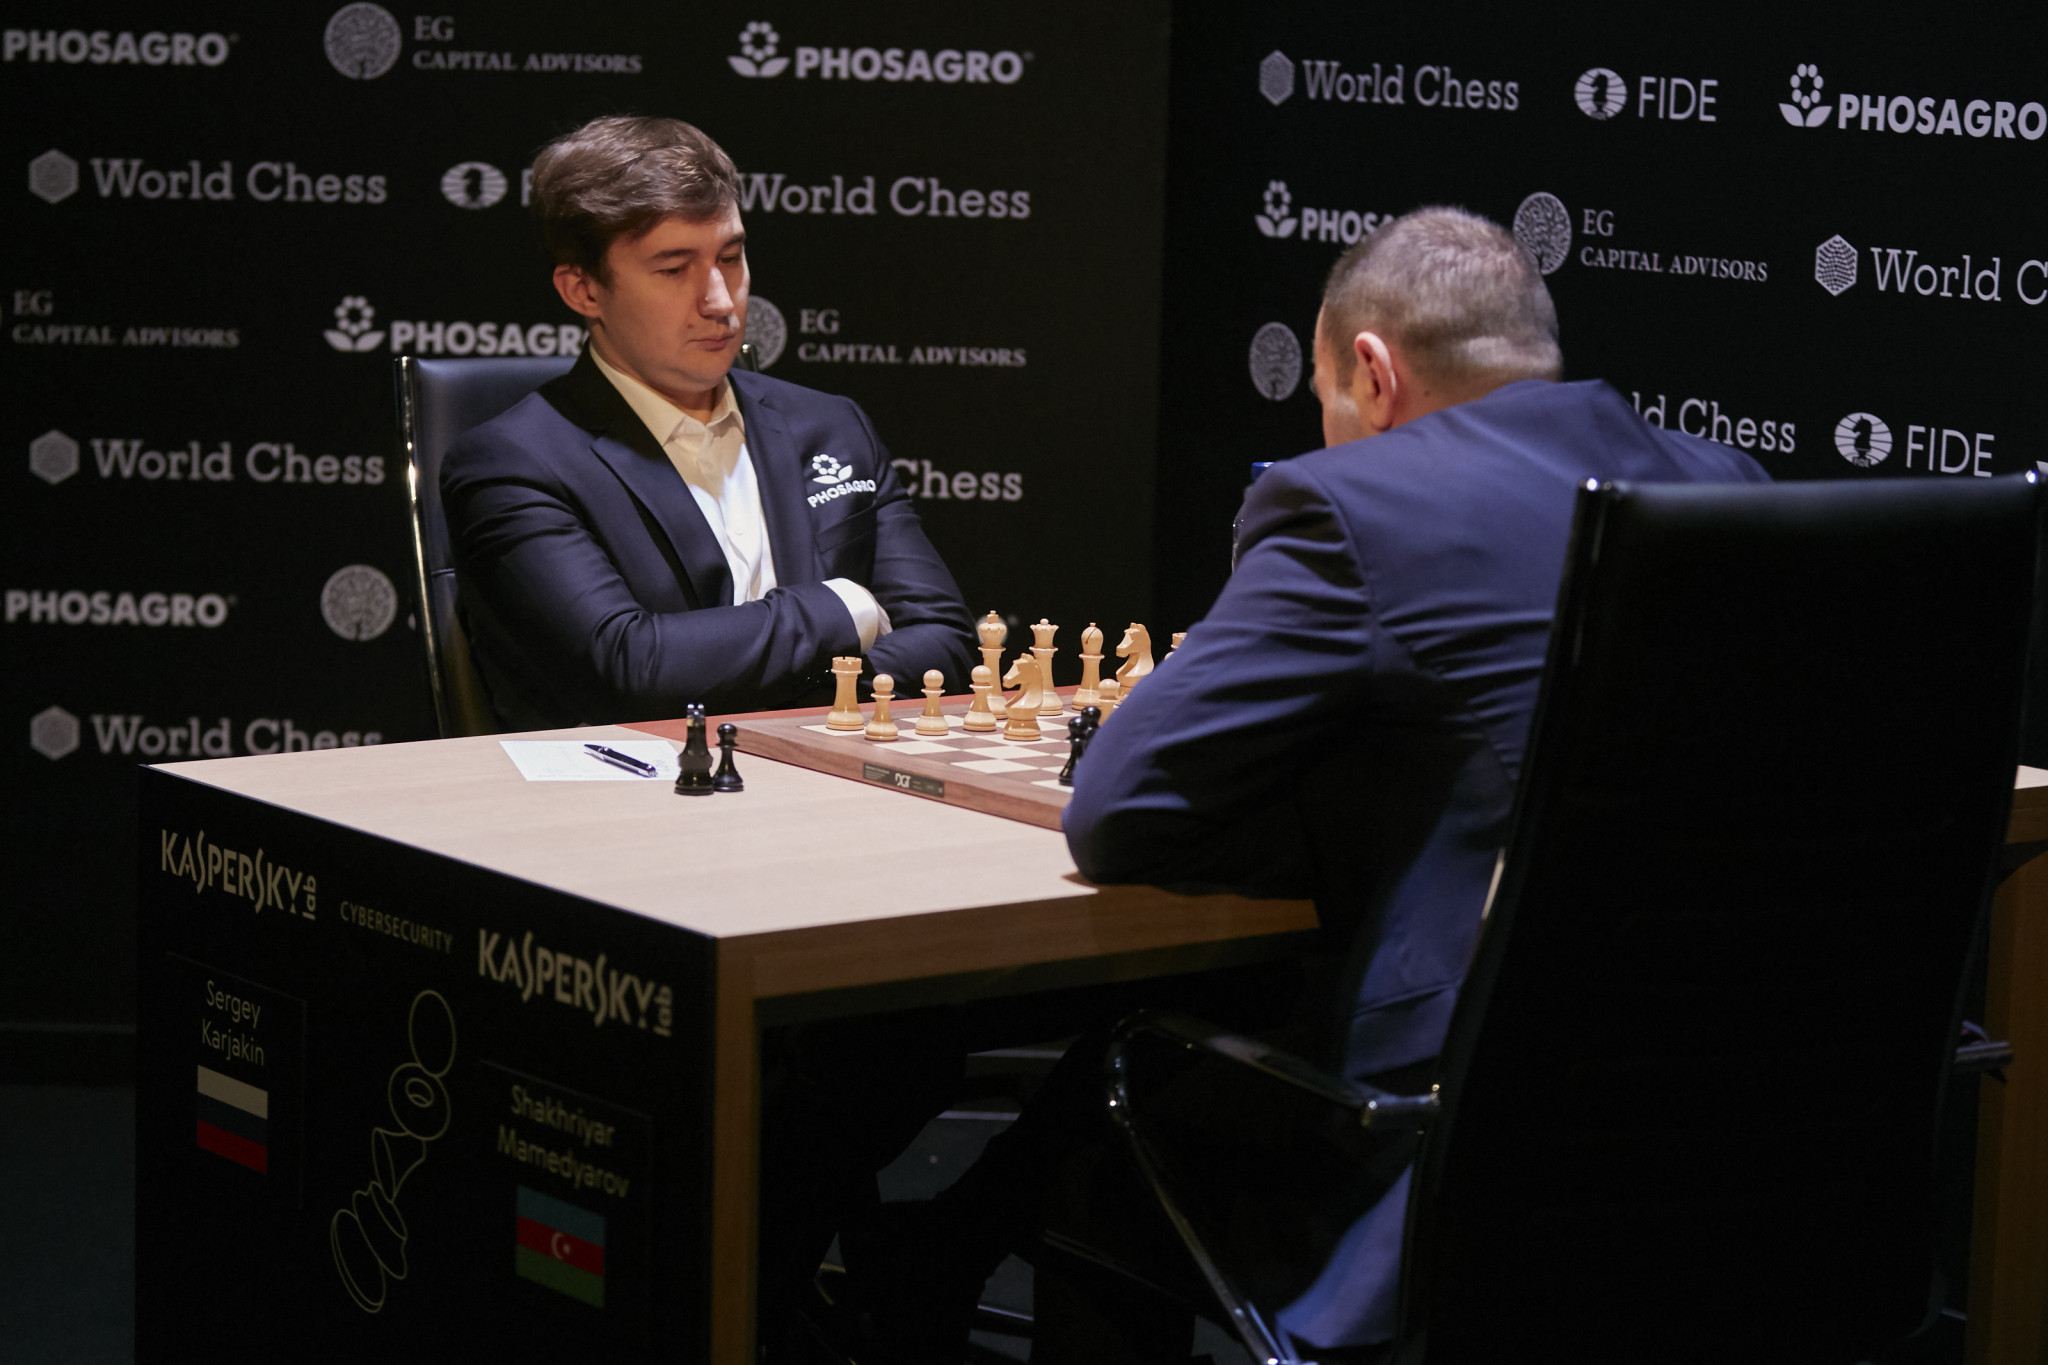 Sergey Karjakin also believes sport and politics should be separated ©Getty Images